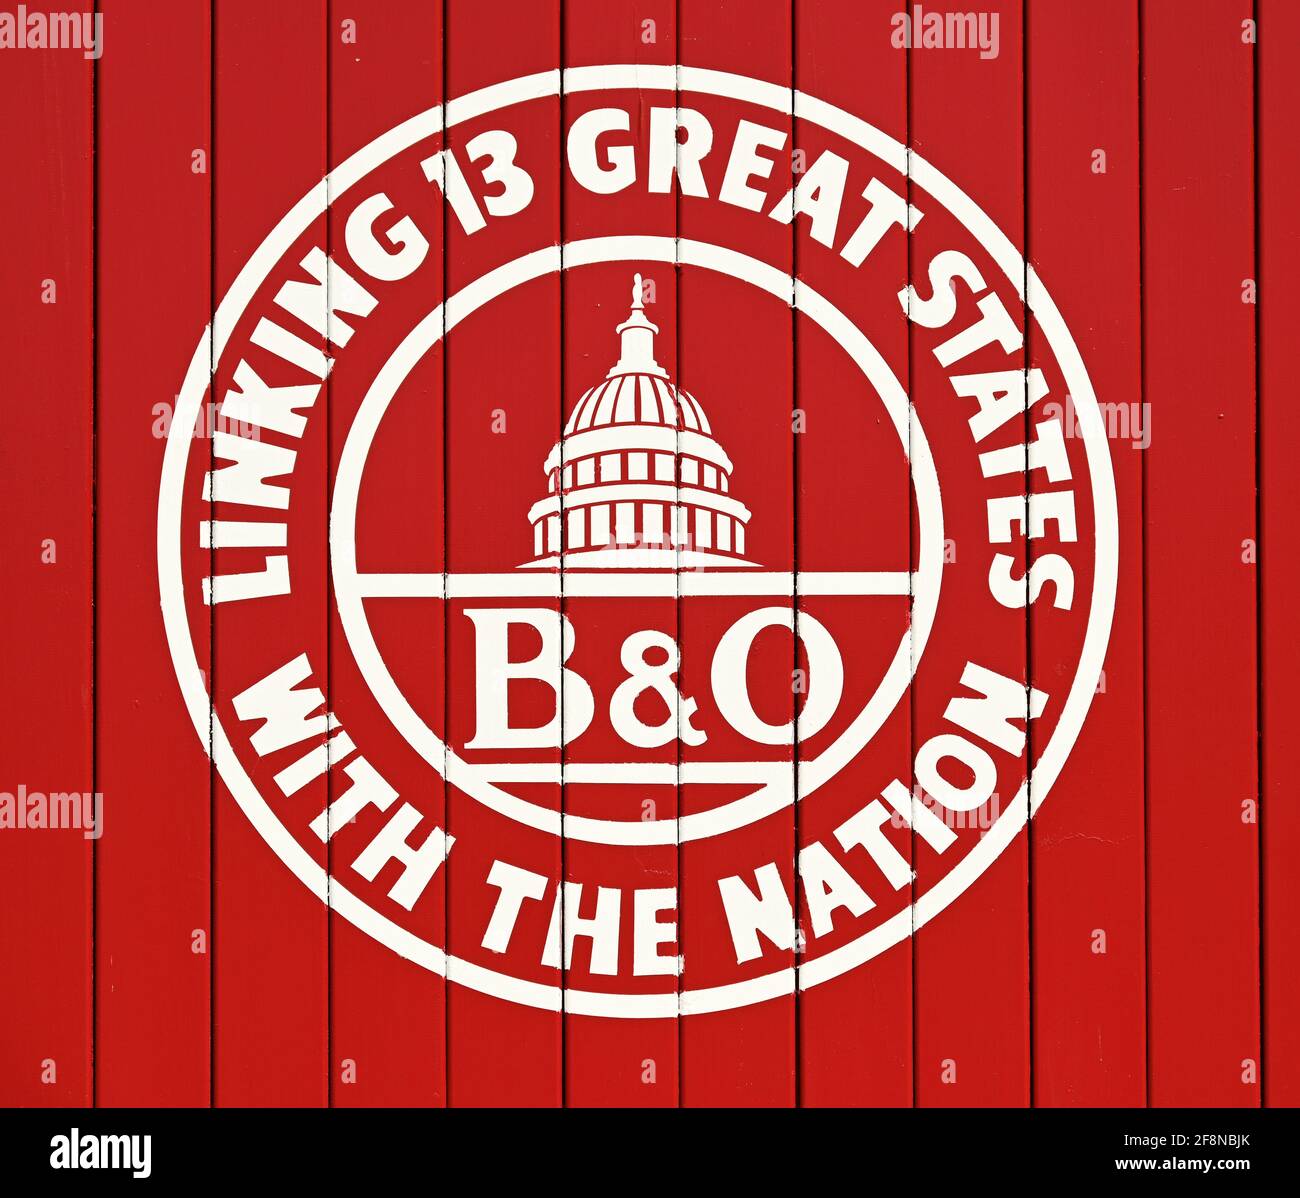 Logo for B&O Railroad painted on red wood panels in Ellicott City, Maryland. Stock Photo